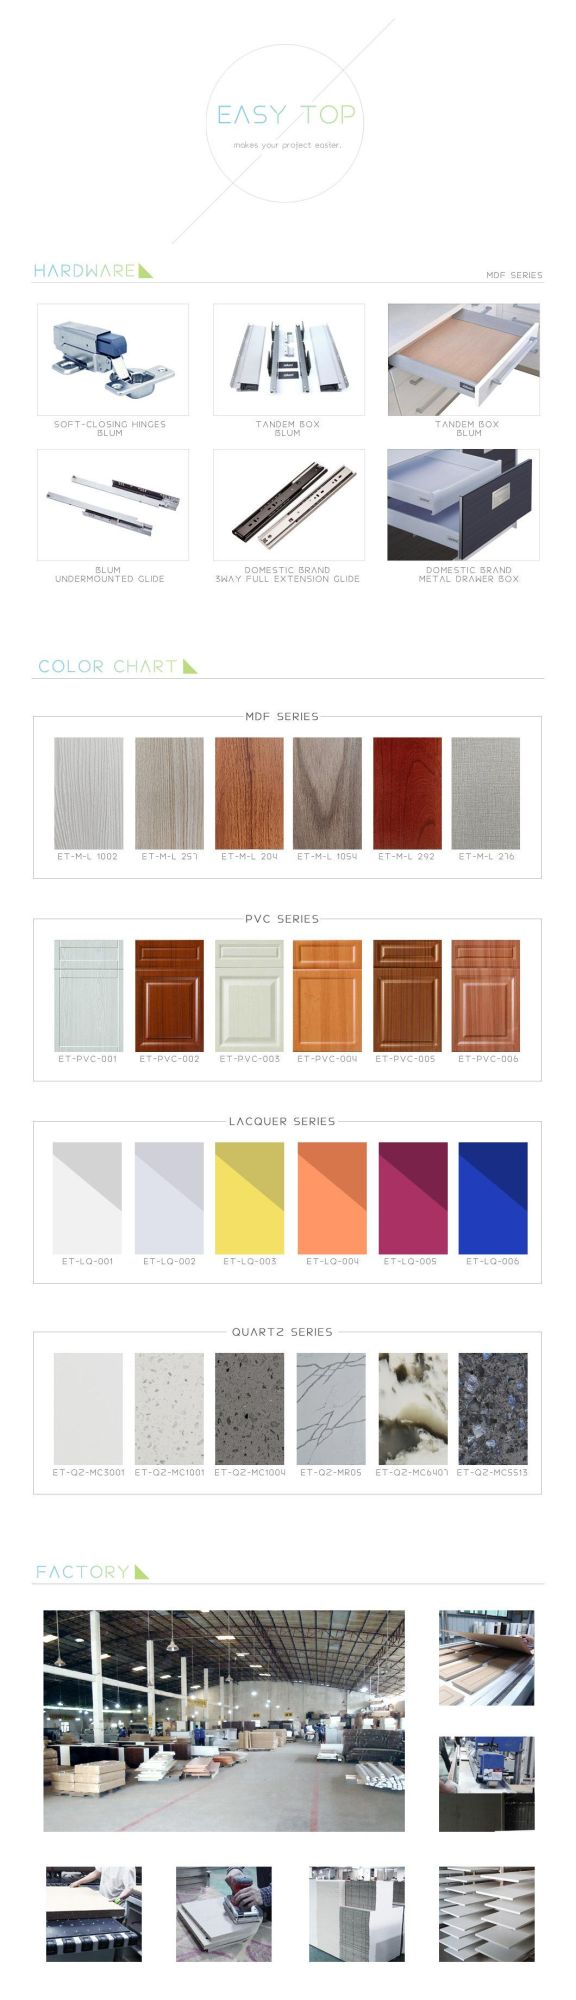 High End Modern Pure White Lacquer Finish Kitchen Customized Cabinet for Project Use